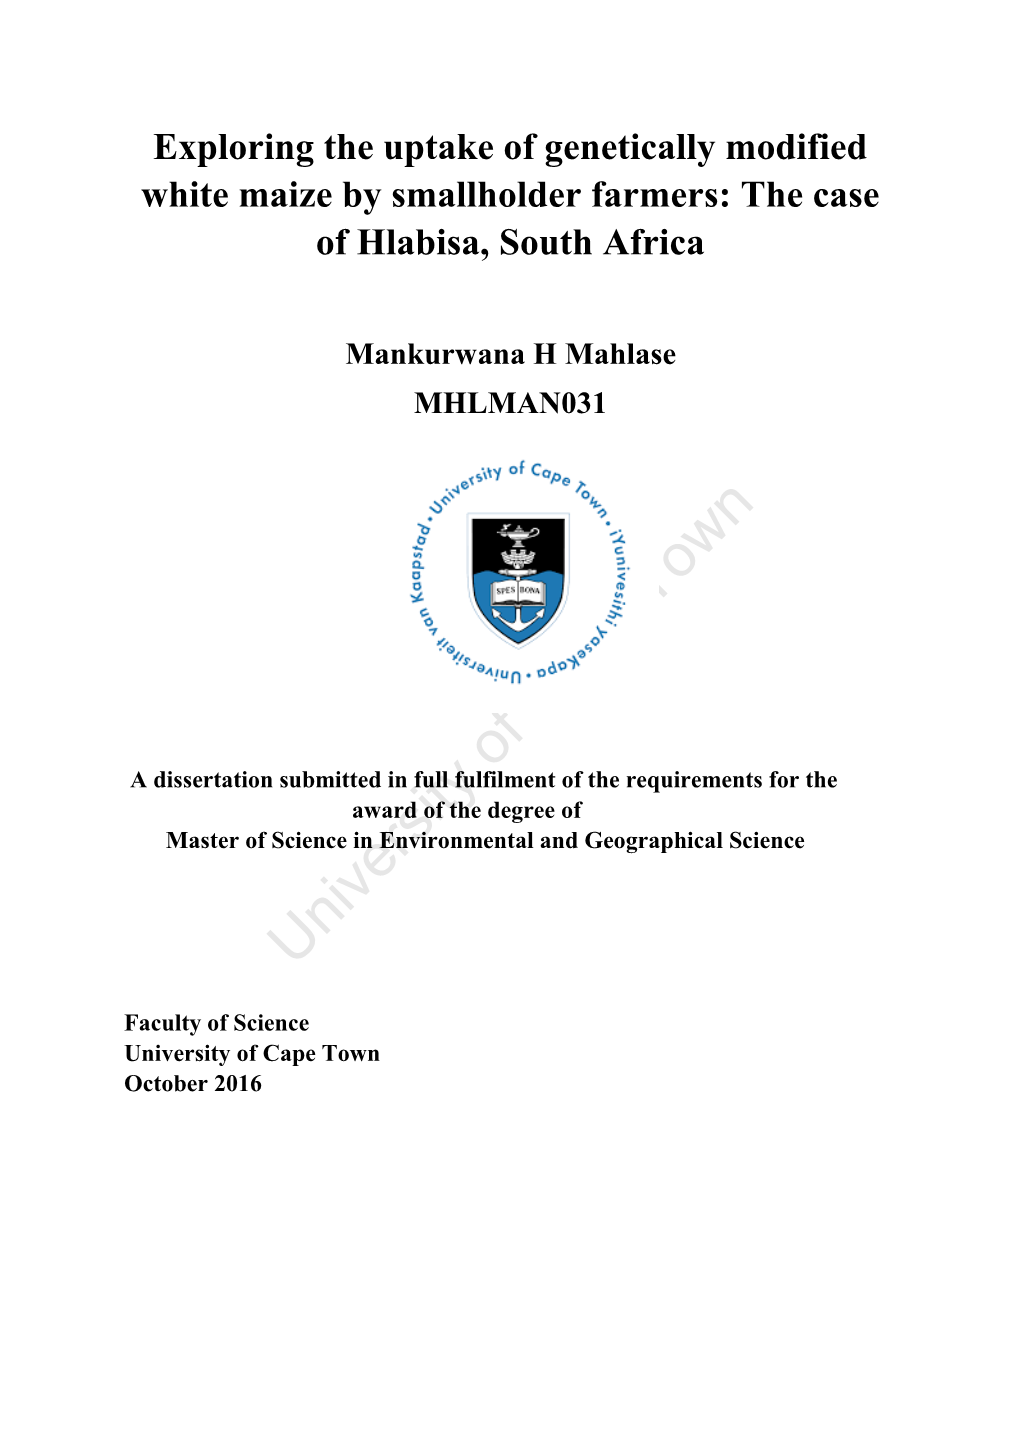 Exploring the Uptake of Genetically Modified White Maize by Smallholder Farmers: the Case of Hlabisa, South Africa